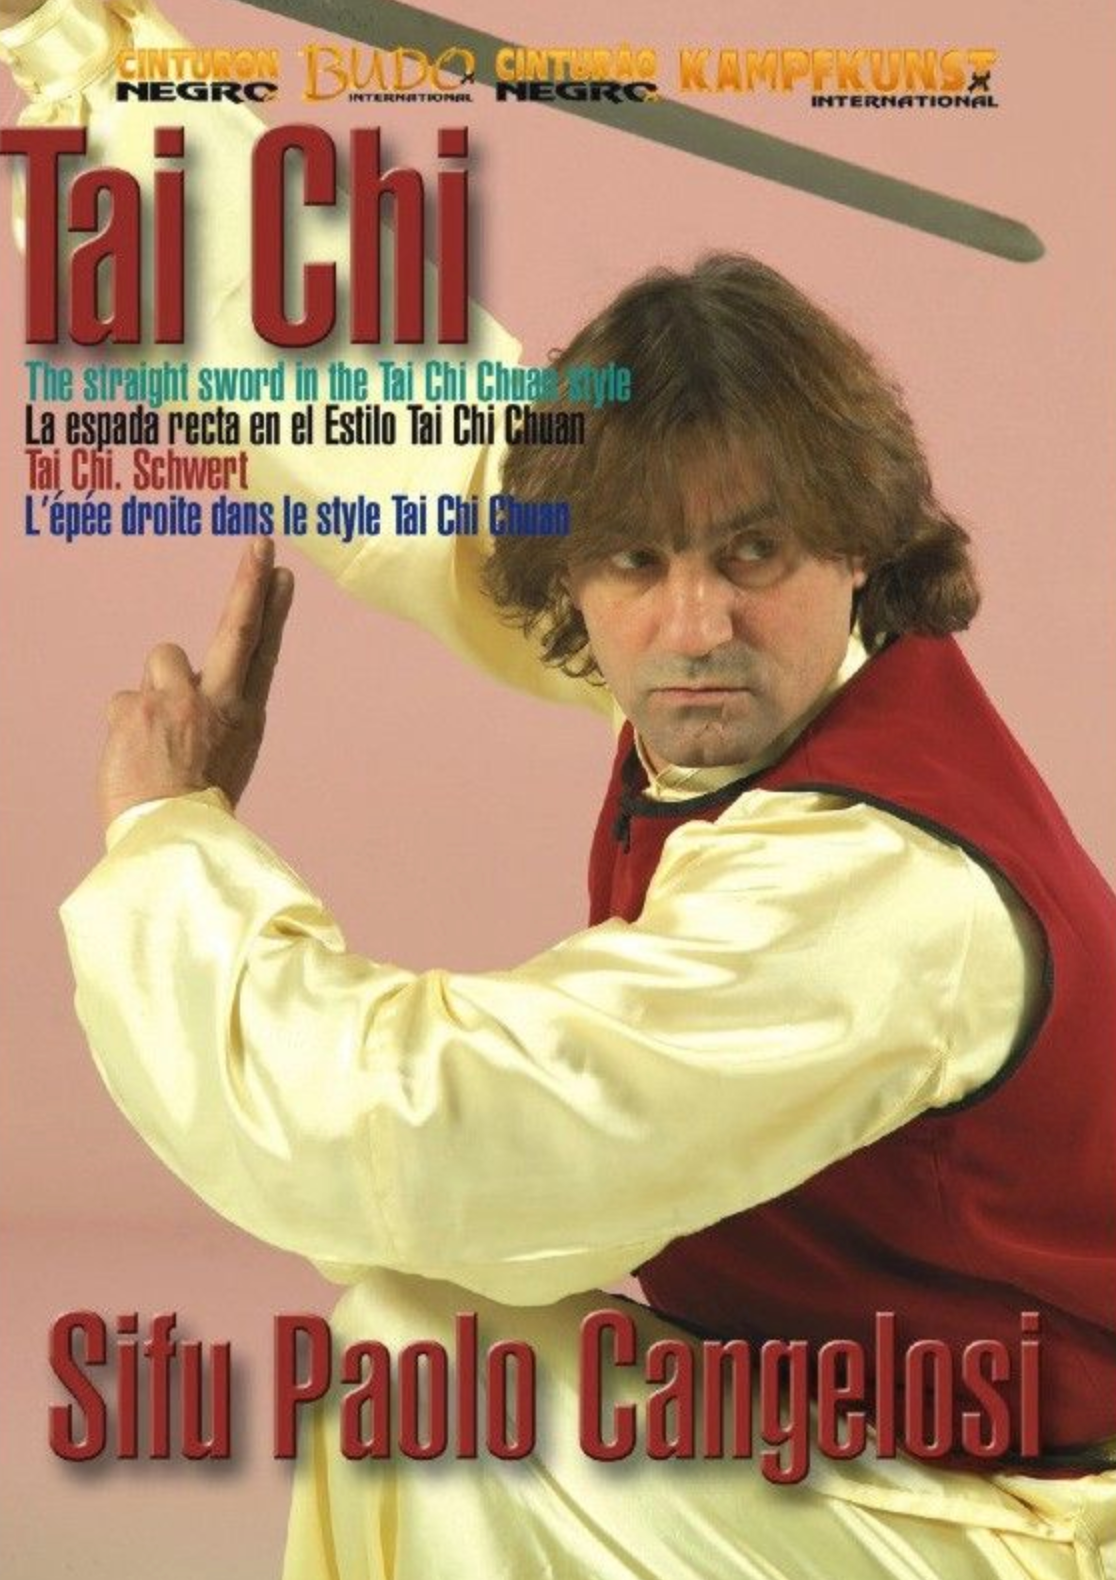 Tai Chi Beijing Jen The Straight Sword DVD by Paolo Cangelosi - Budovideos Inc